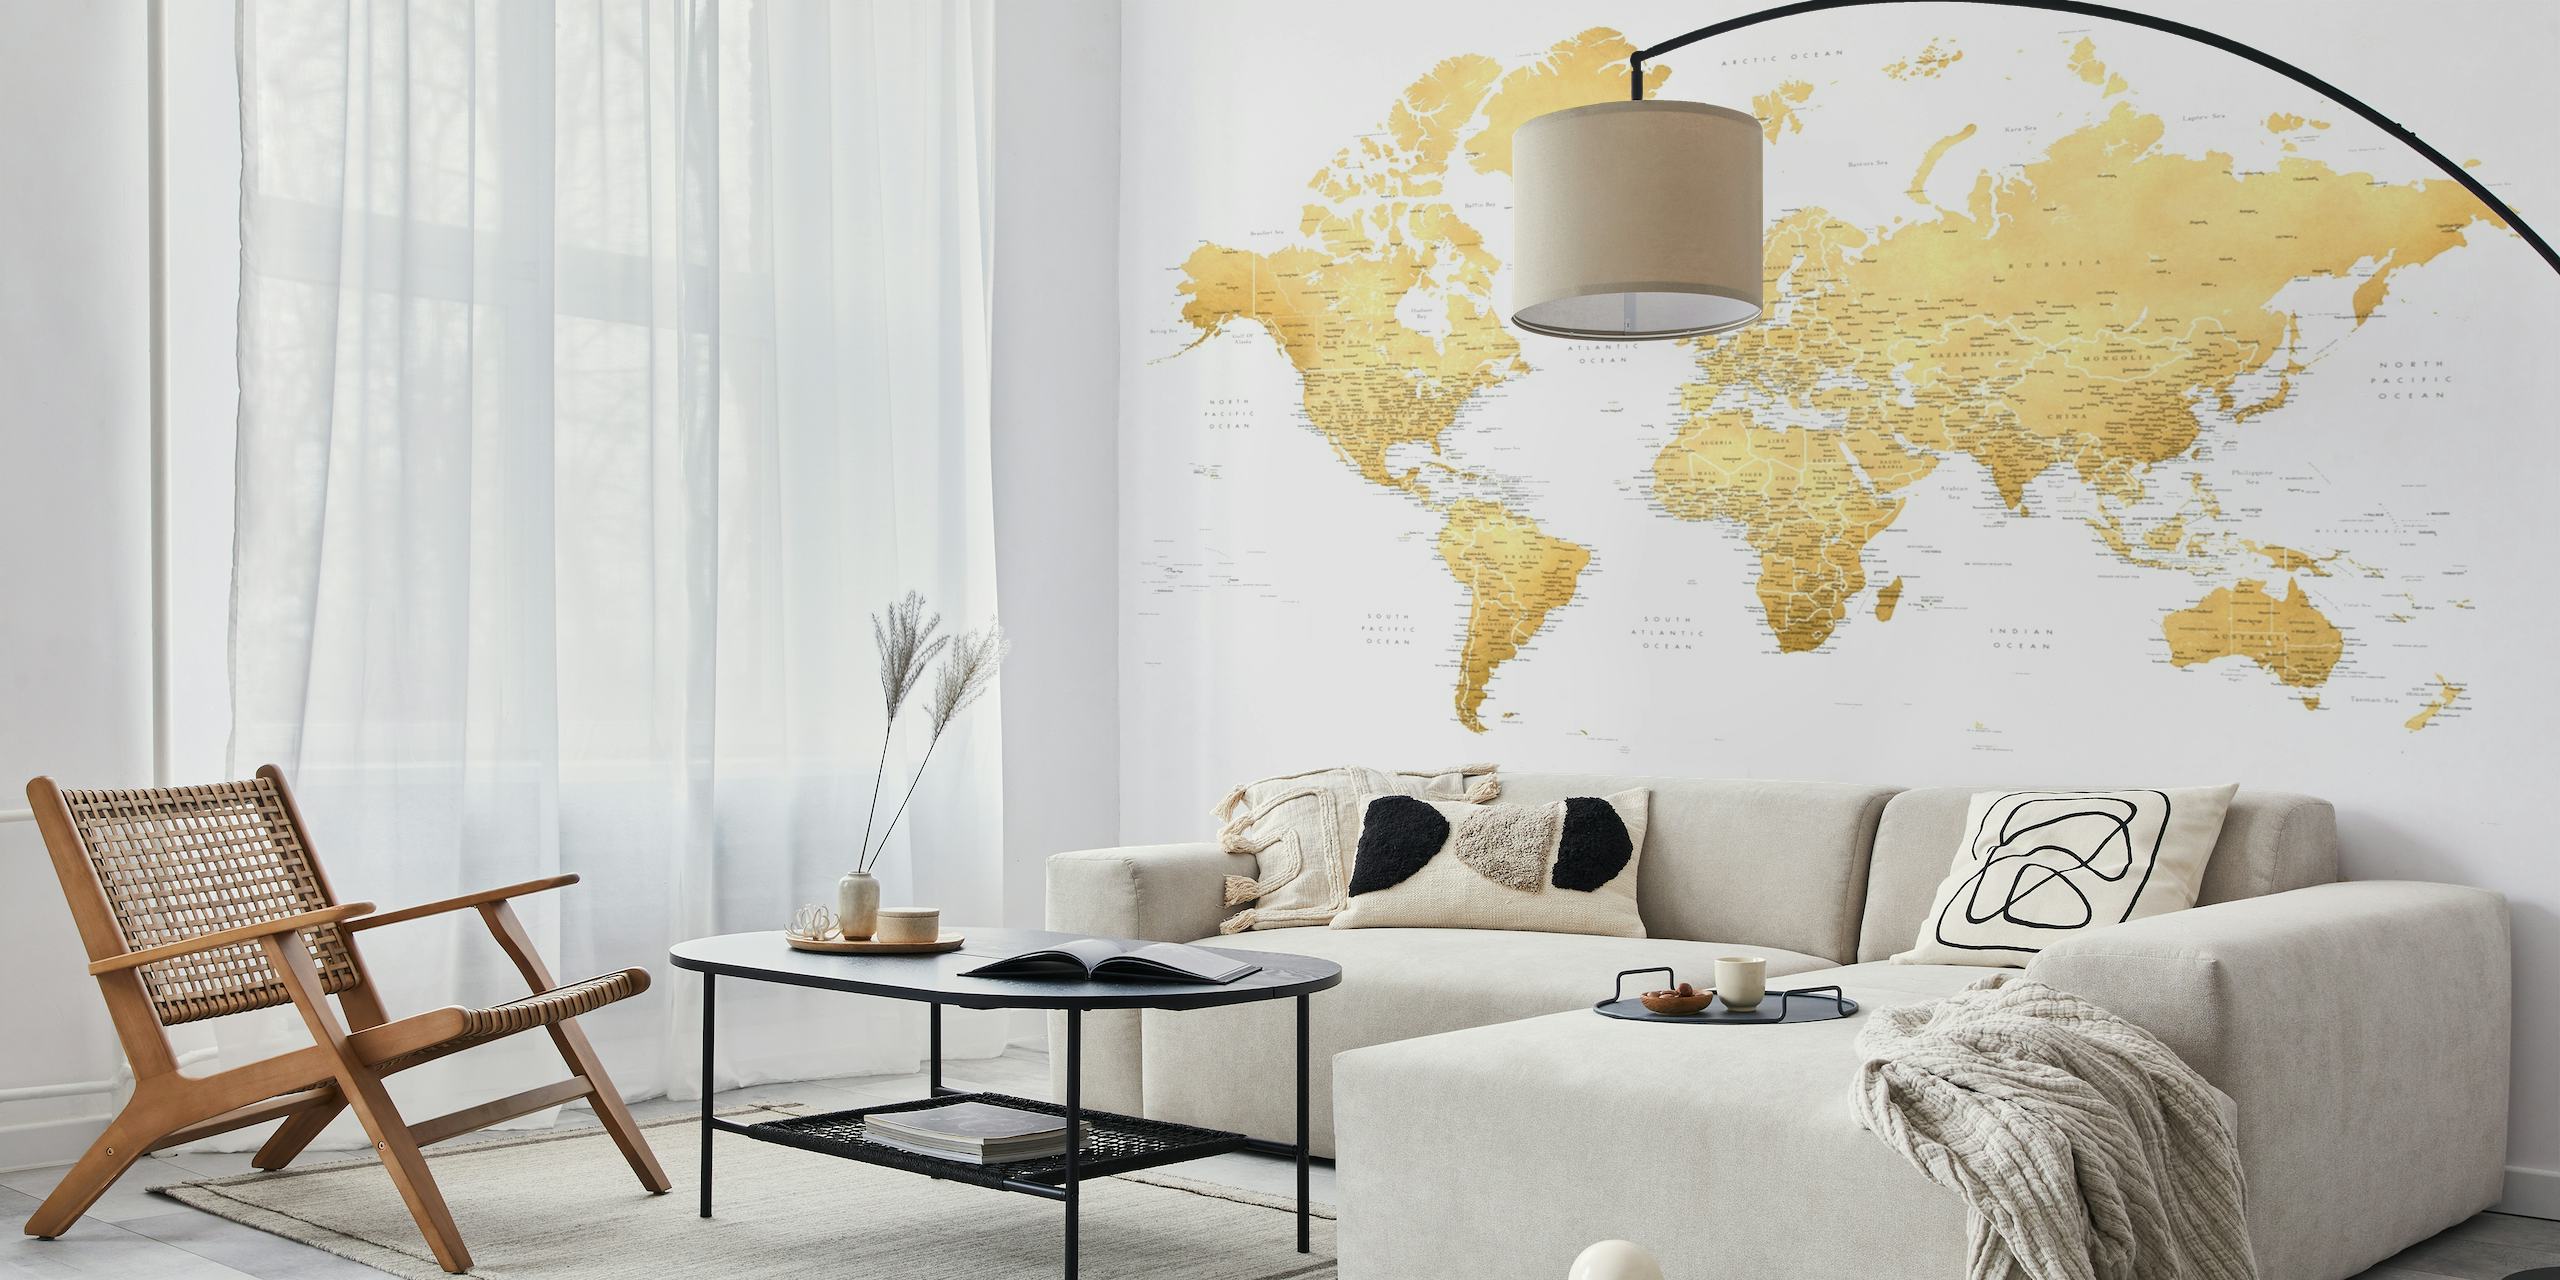 Elegant world map wall mural with golden accents focusing on Antarctica